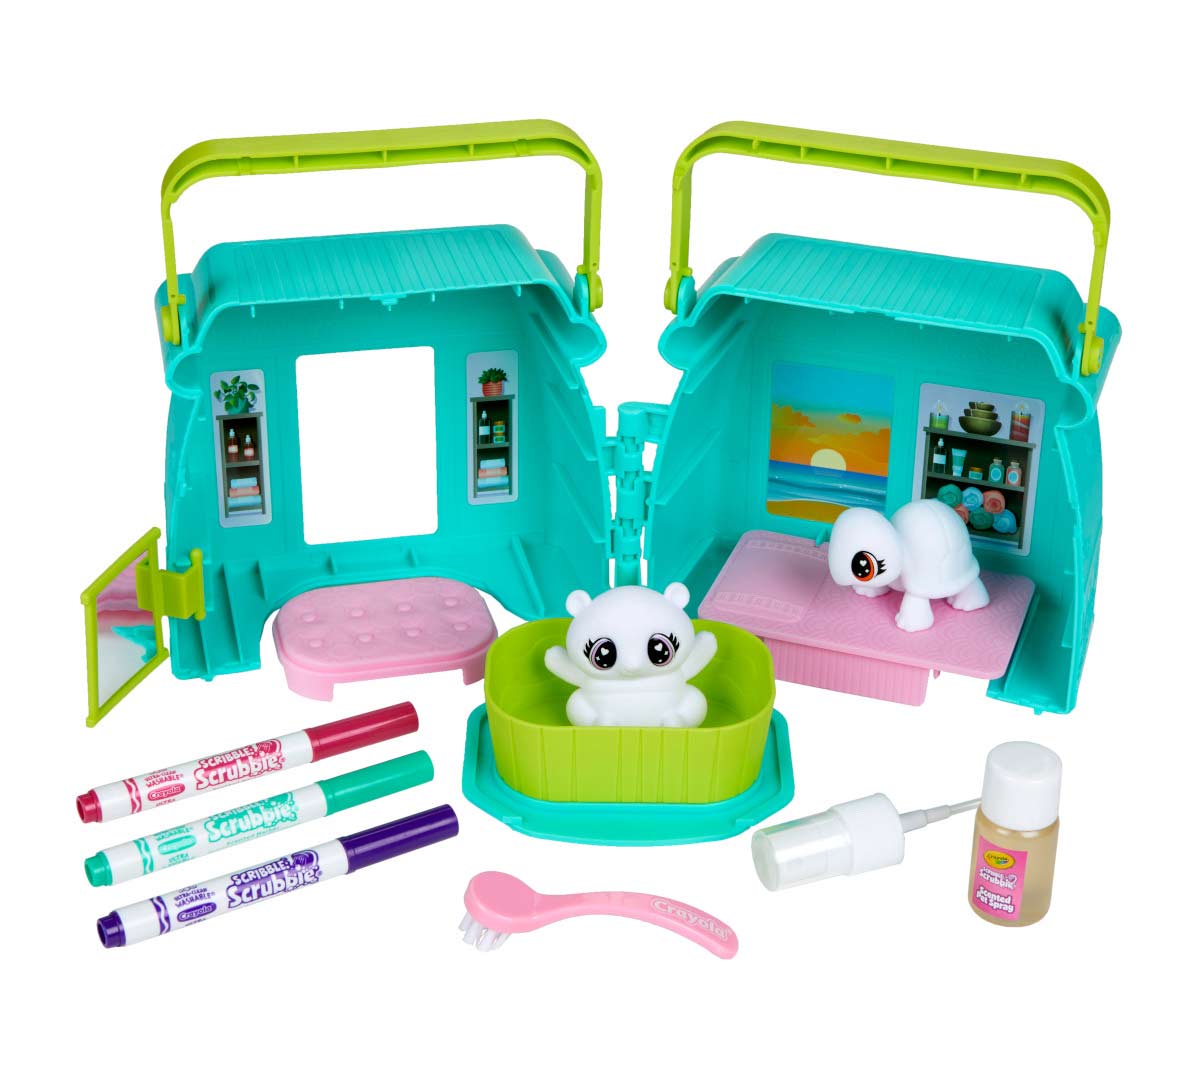 Crayola Scribble Scrubbie Pets Scented Spa Activity Kit